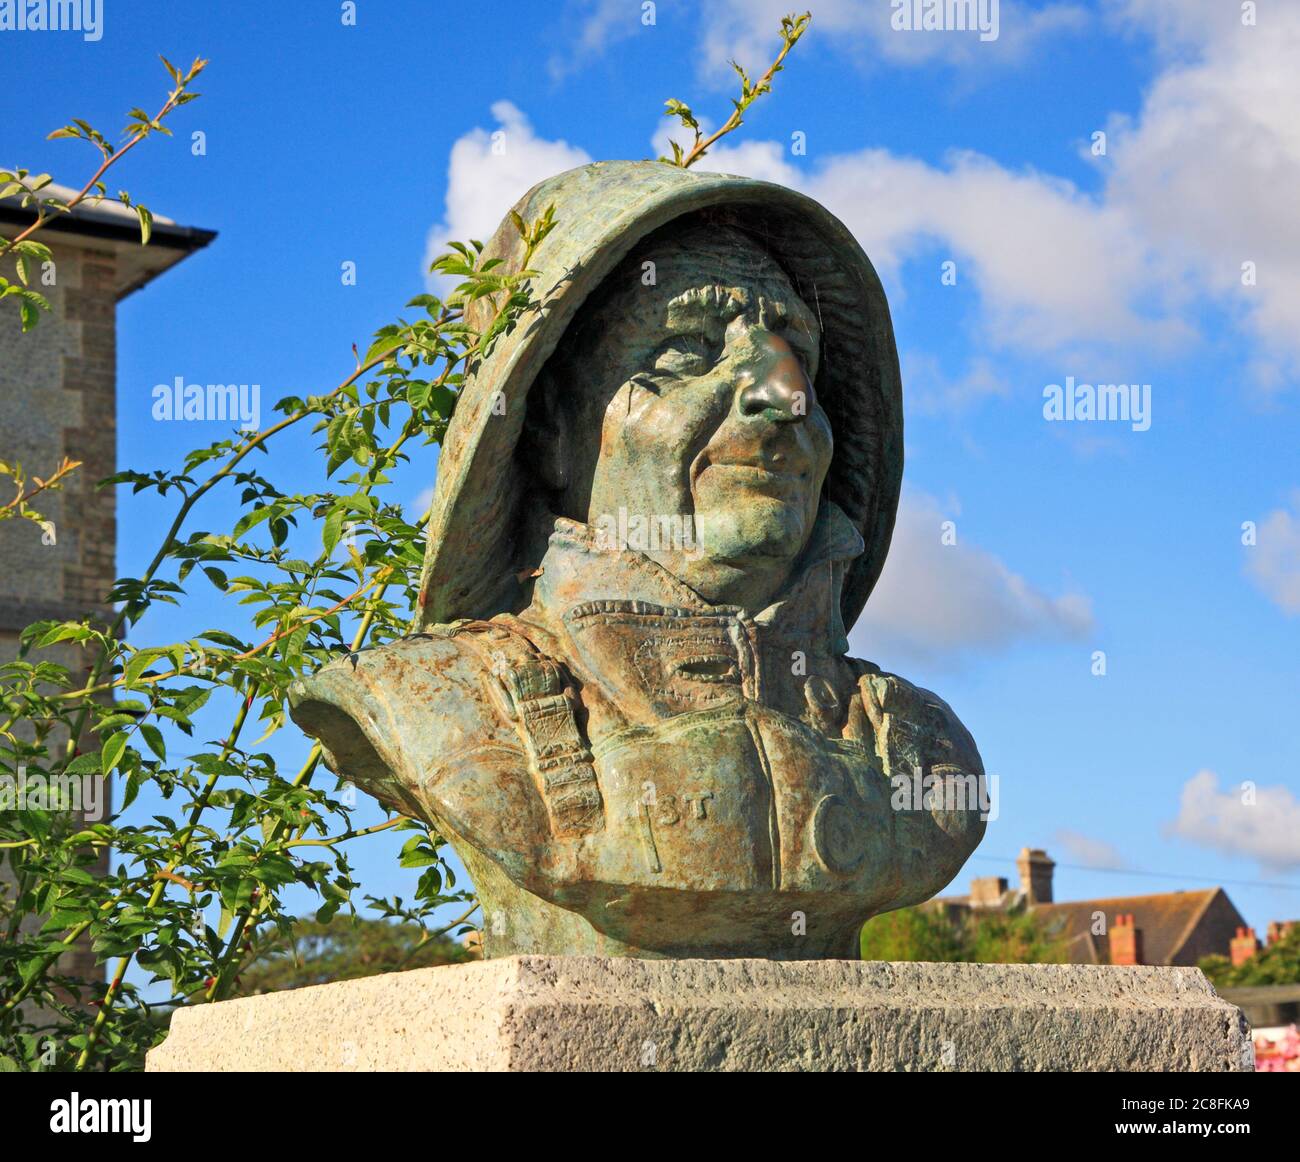 A view of the bronze bust of lifeboatman Henry George Blogg GC BEM at North Lodge Park, Cromer, Norfolk, England, United Kingdom. Stock Photo